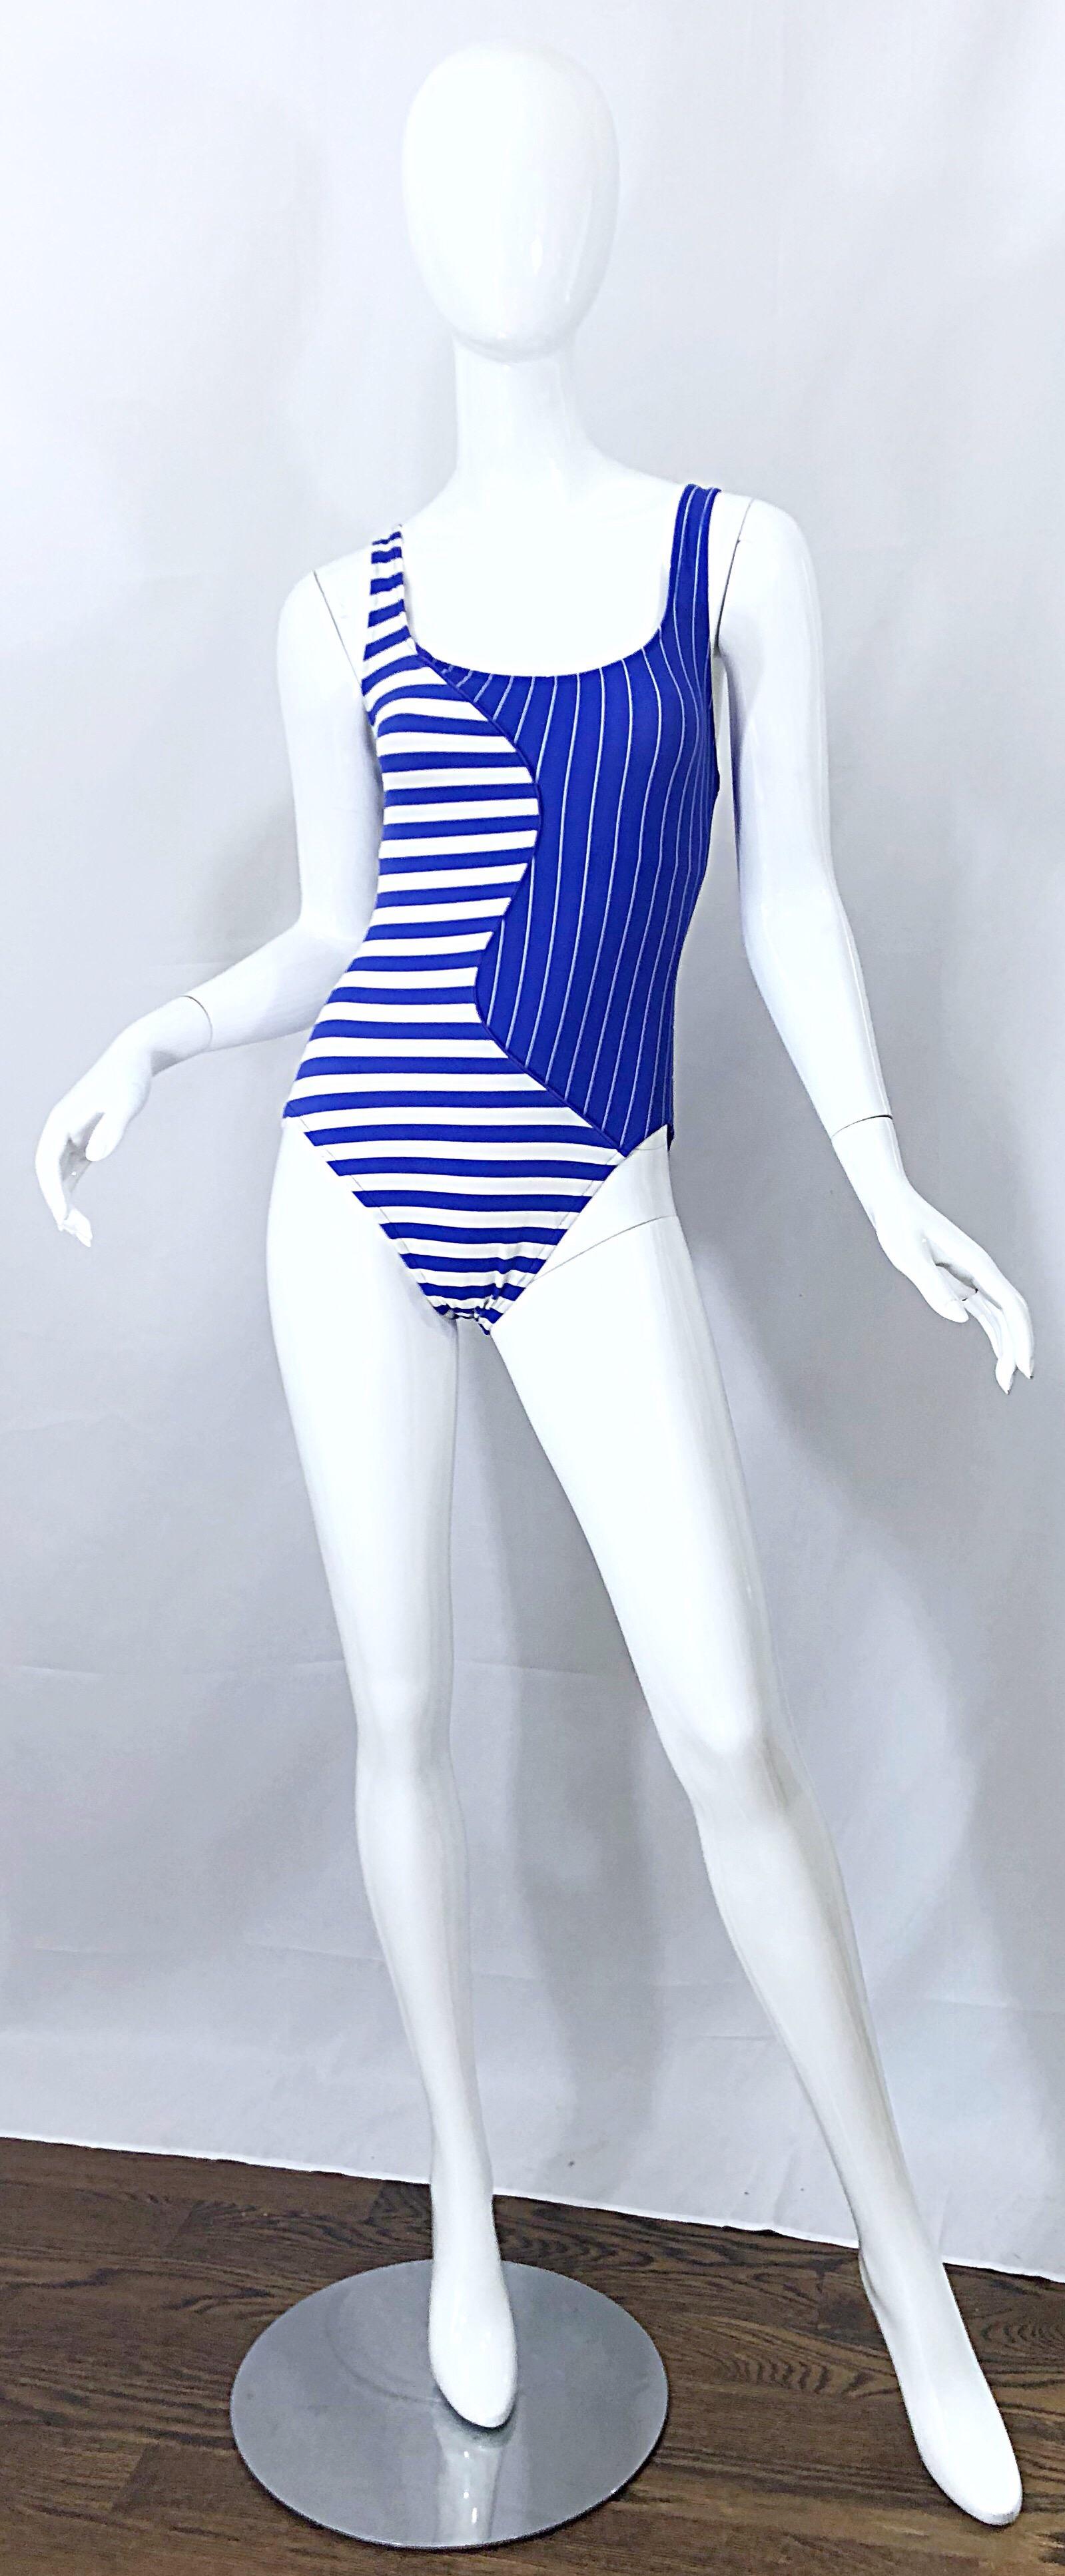 90s BILL BLASS royal blue and white striped nautical one piece swimsuit or bodysuit! Features flattering contrasting stripes on the front and back. Dipped back reveals just the right amount of skin. The perfect timeless piece that is great for the